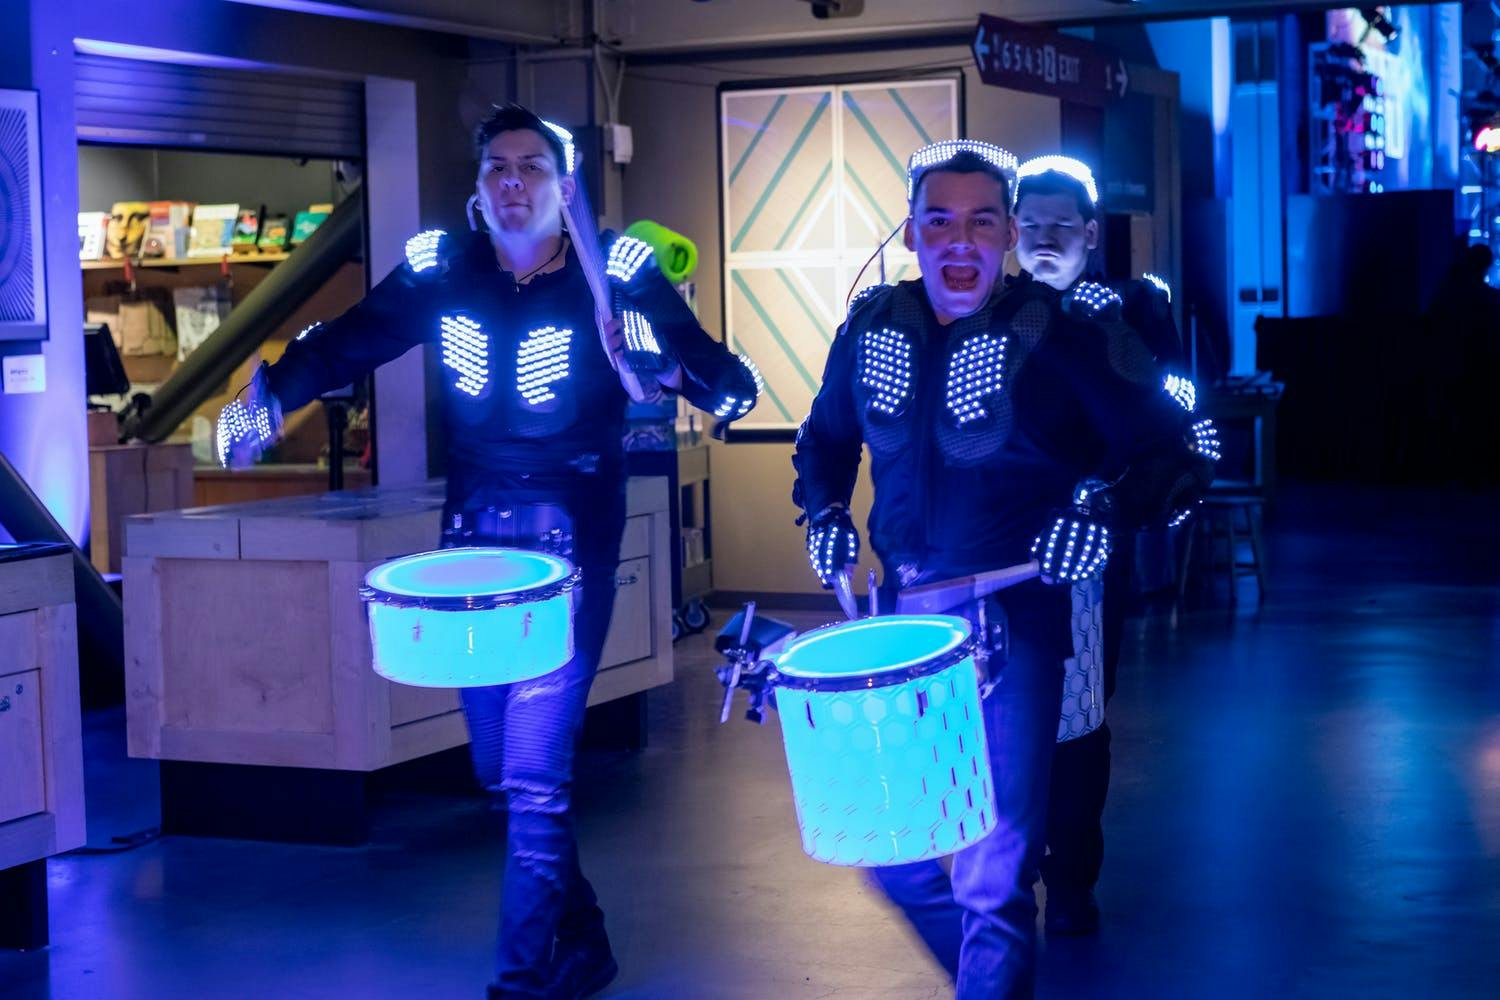 Marching Drummers with Glow-in-the-Dark Blue Drums | PartySlate